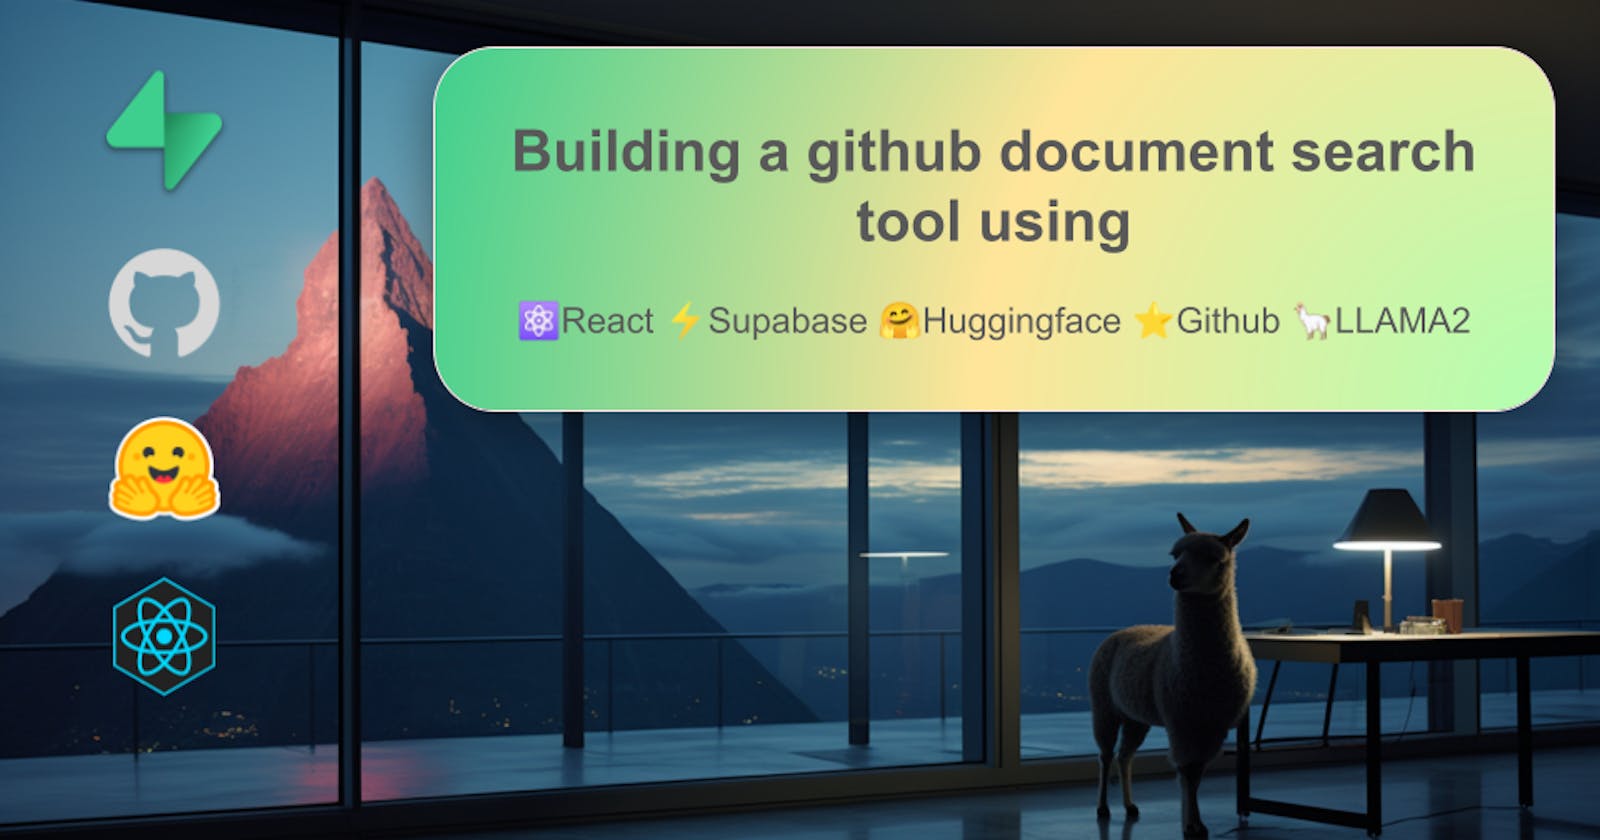 Lets build a Github document search tool using React + Supabase + LLAMA2